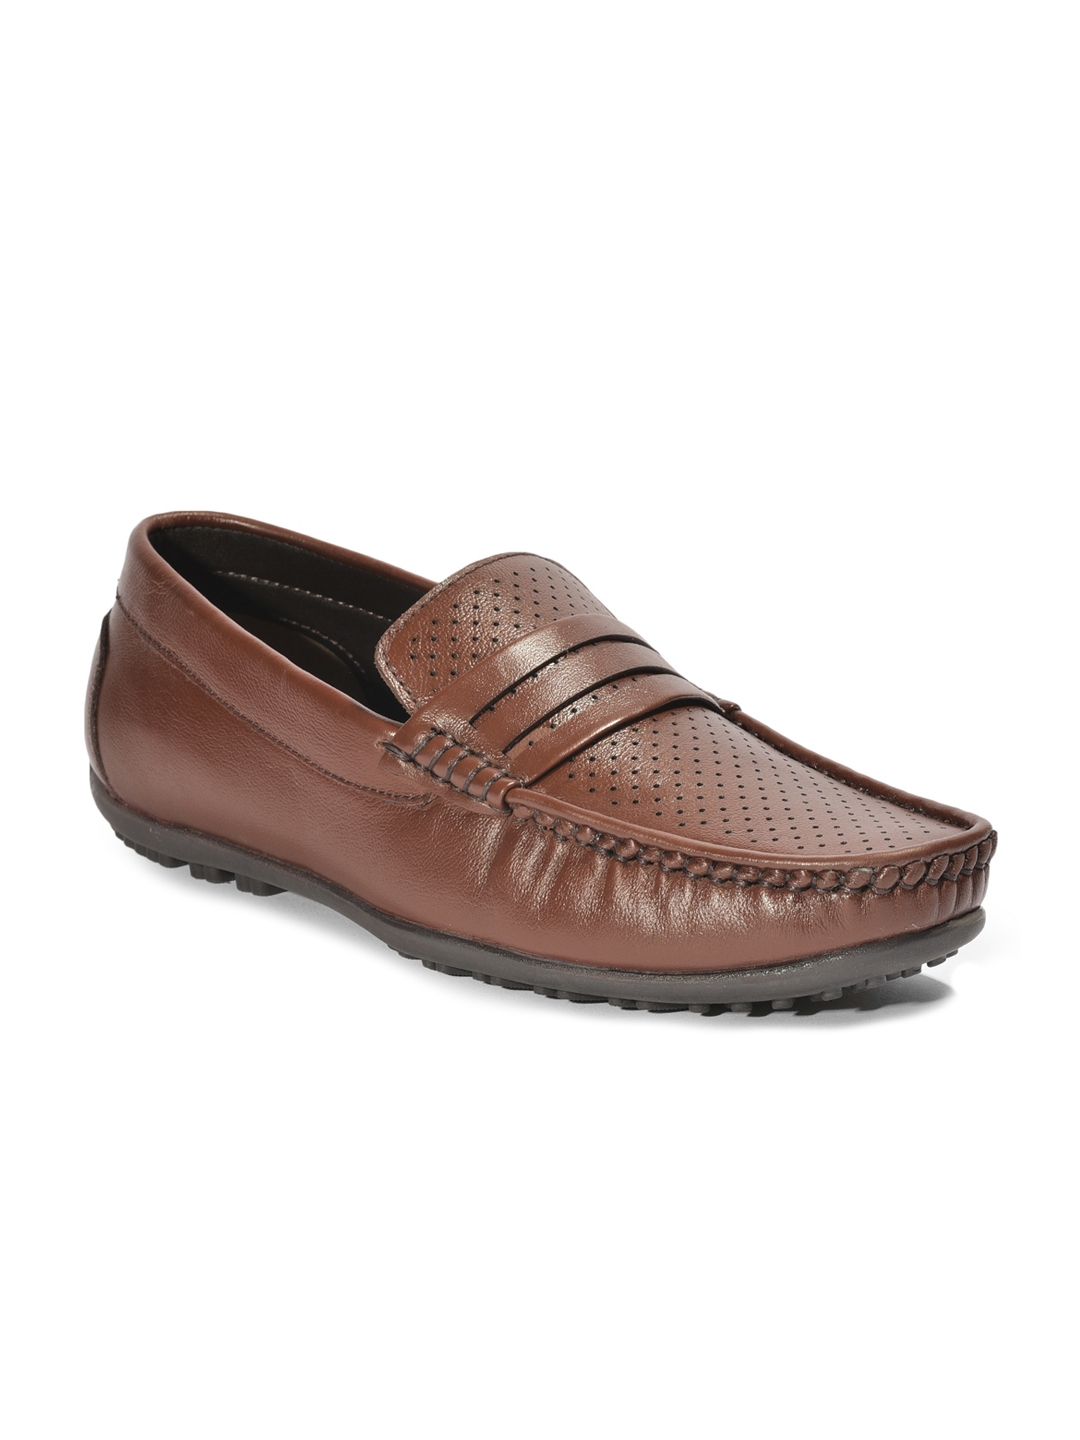 Buy Liberty Men Tan Textured Leather Loafers - Casual Shoes for Men ...